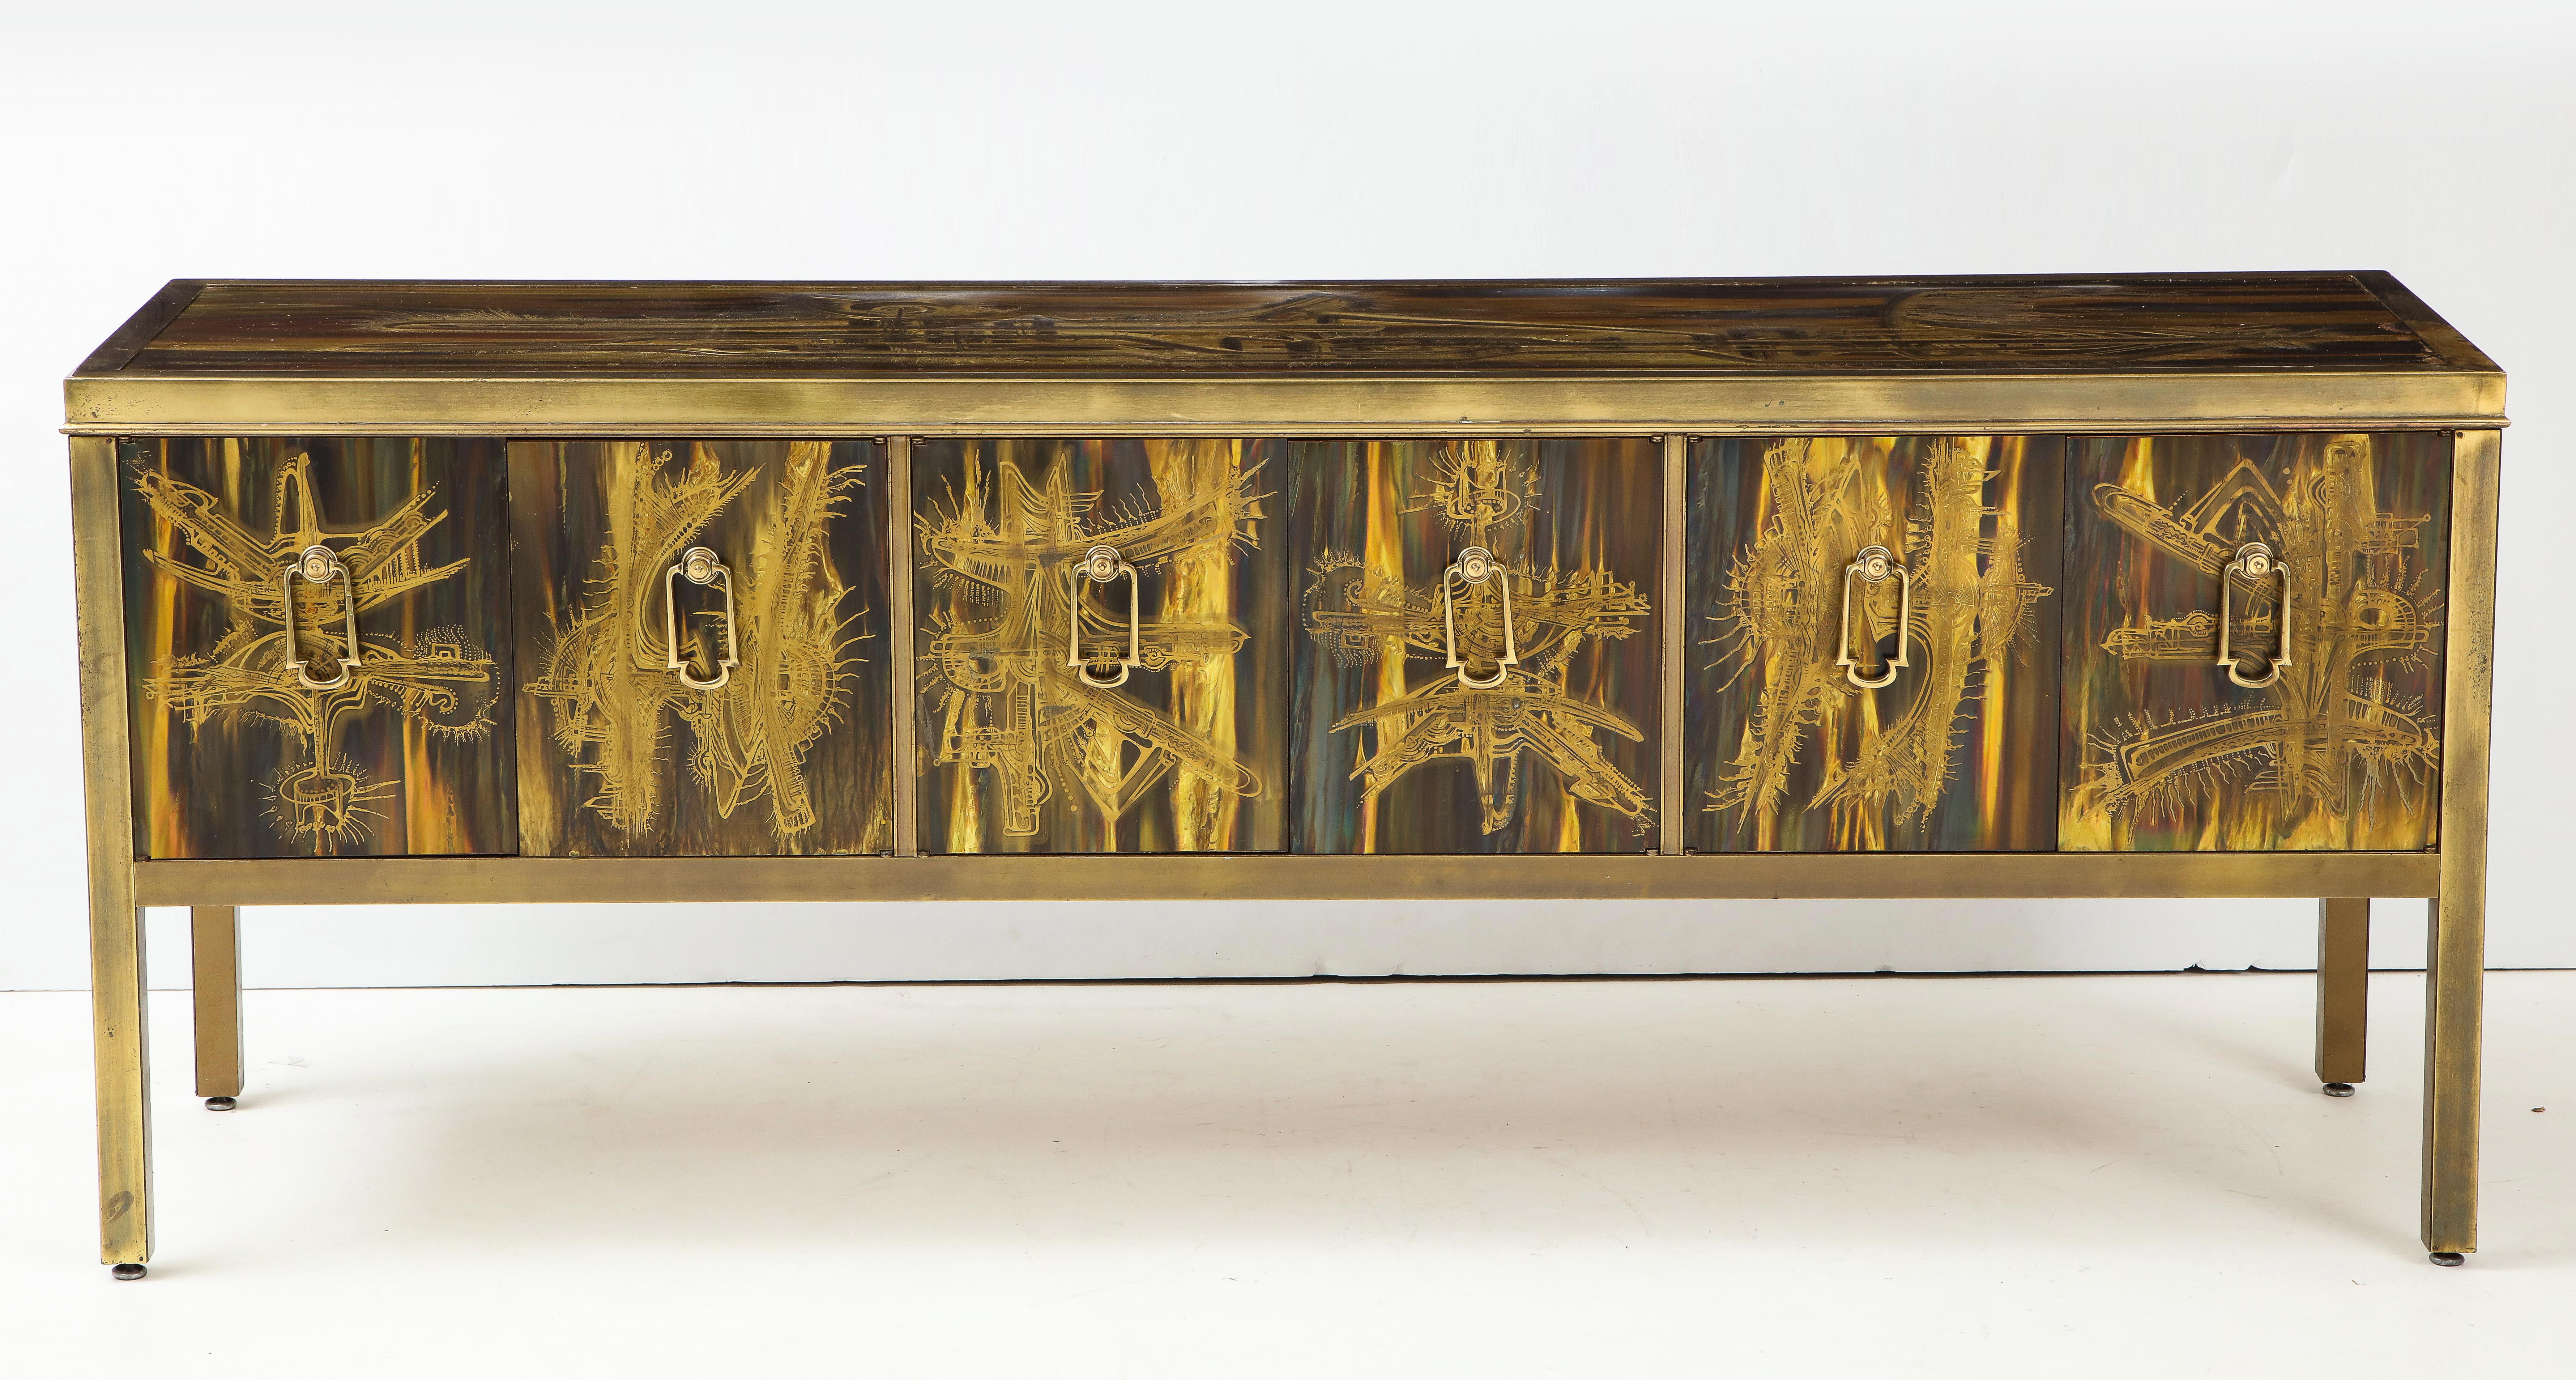 1970s chic acid etched ages brass credenza from one of the masters of metal, Berhard Rhone. The four panel doors feature brass doorknocker style brass pulls, while the case has aged brass framing surrounding the handwrought acid washed etched panels.